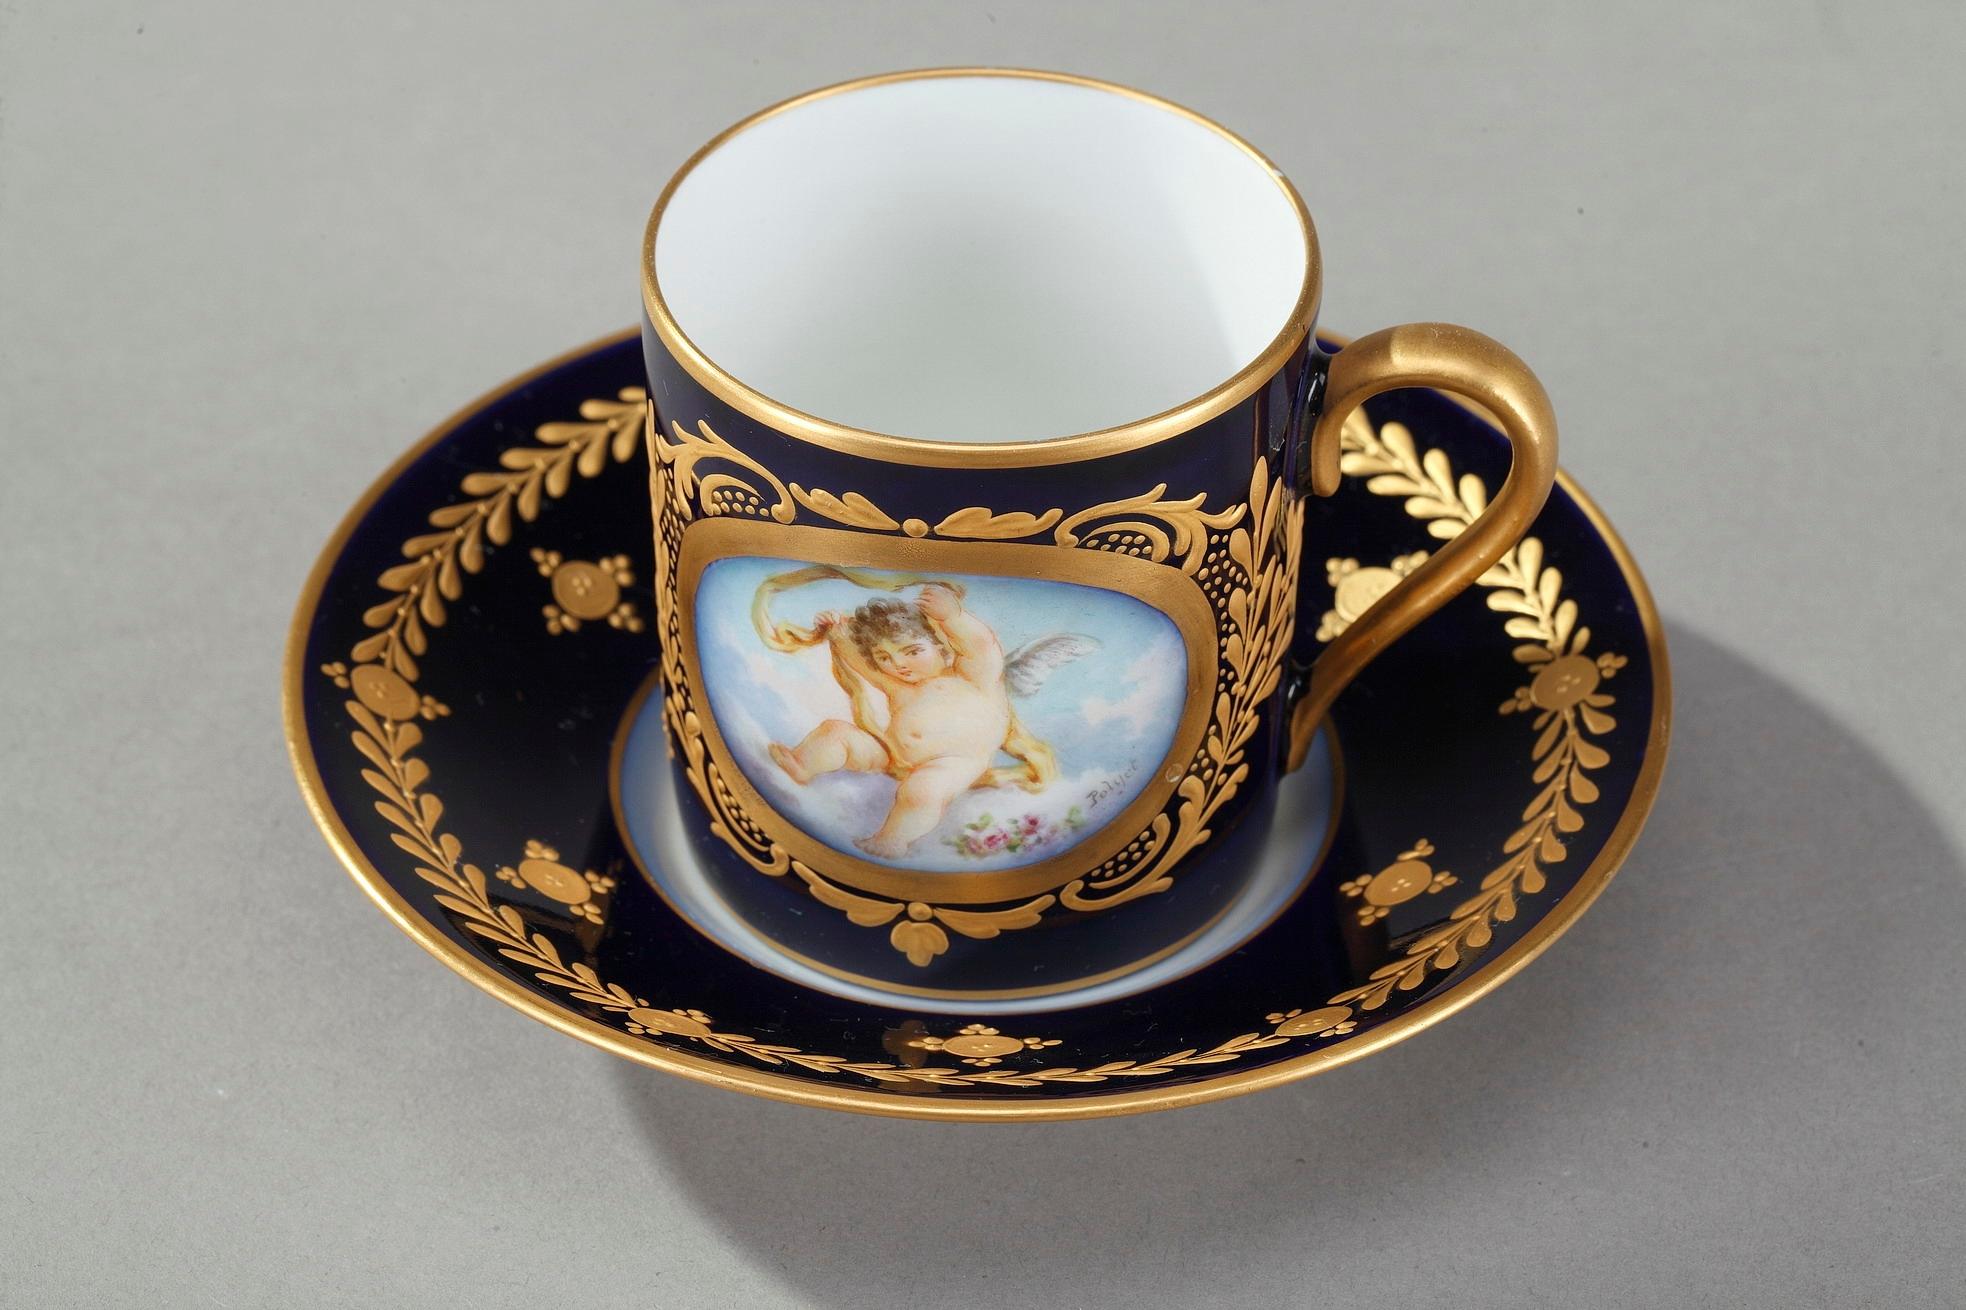 French Porcelain Coffee Service with Mythological Scenes in Sevres Taste